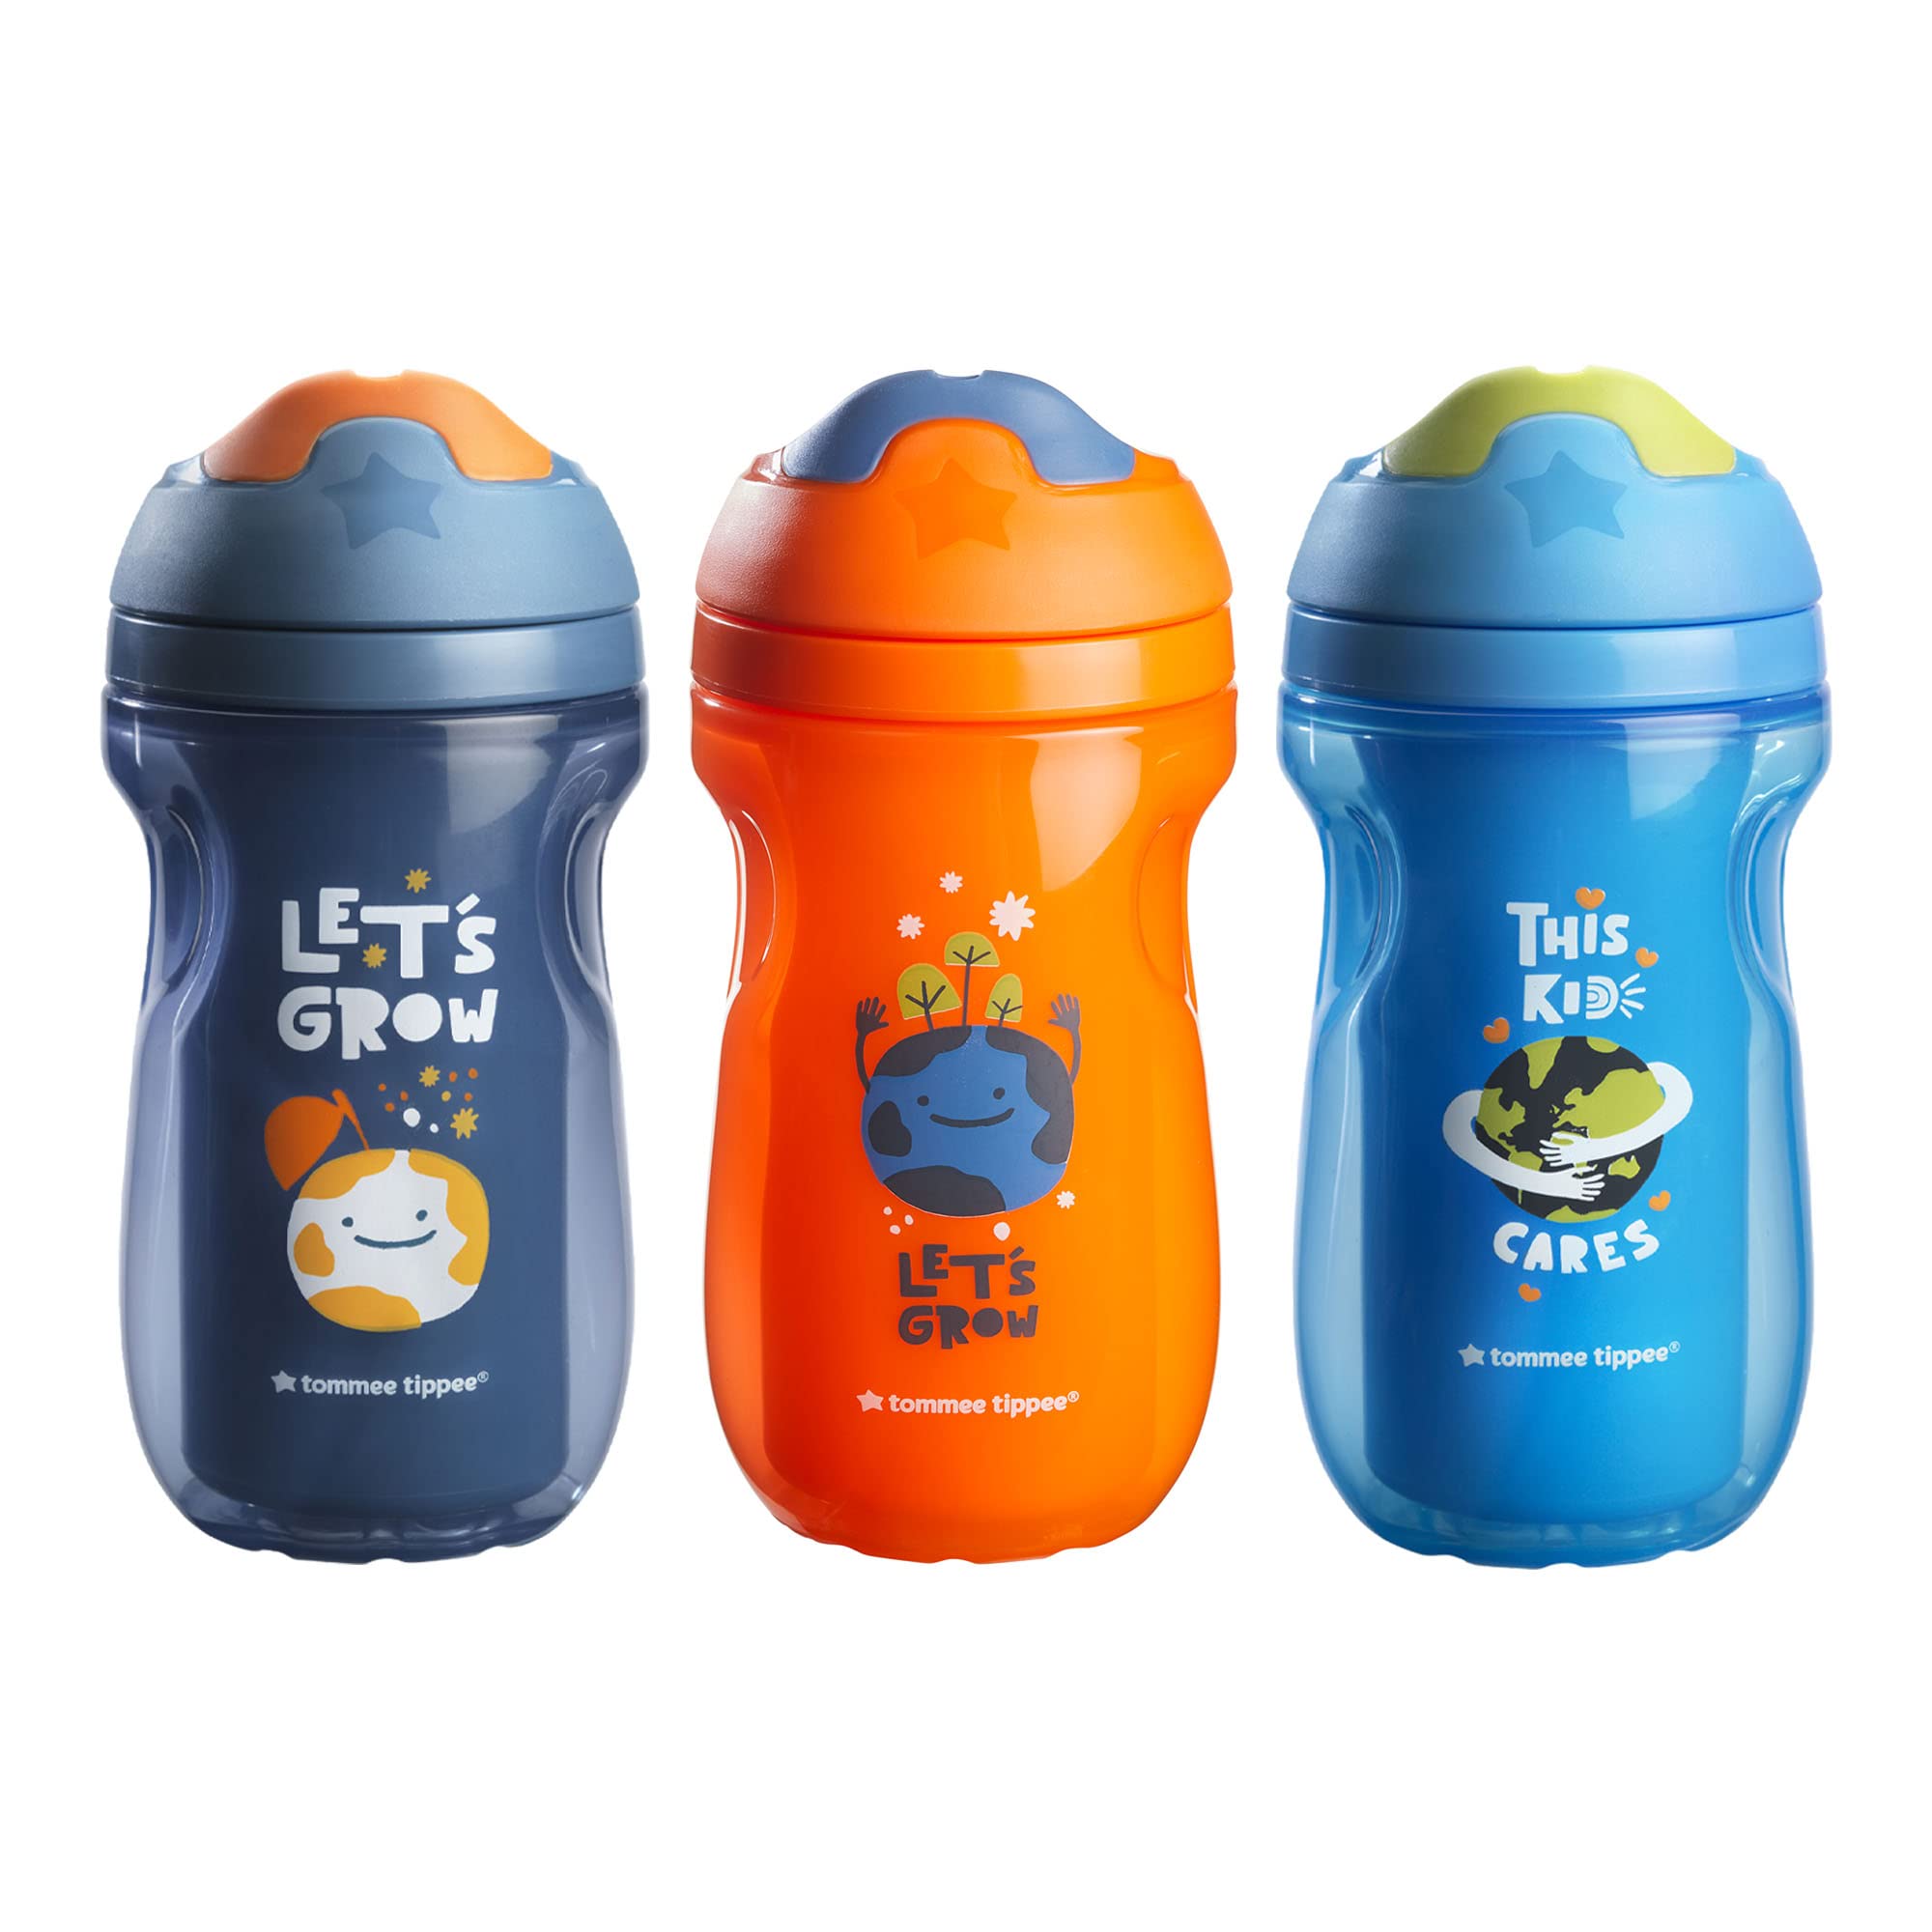 Tommee Tippee Insulated Sippy Cup Water Bottle for Toddlers Spill